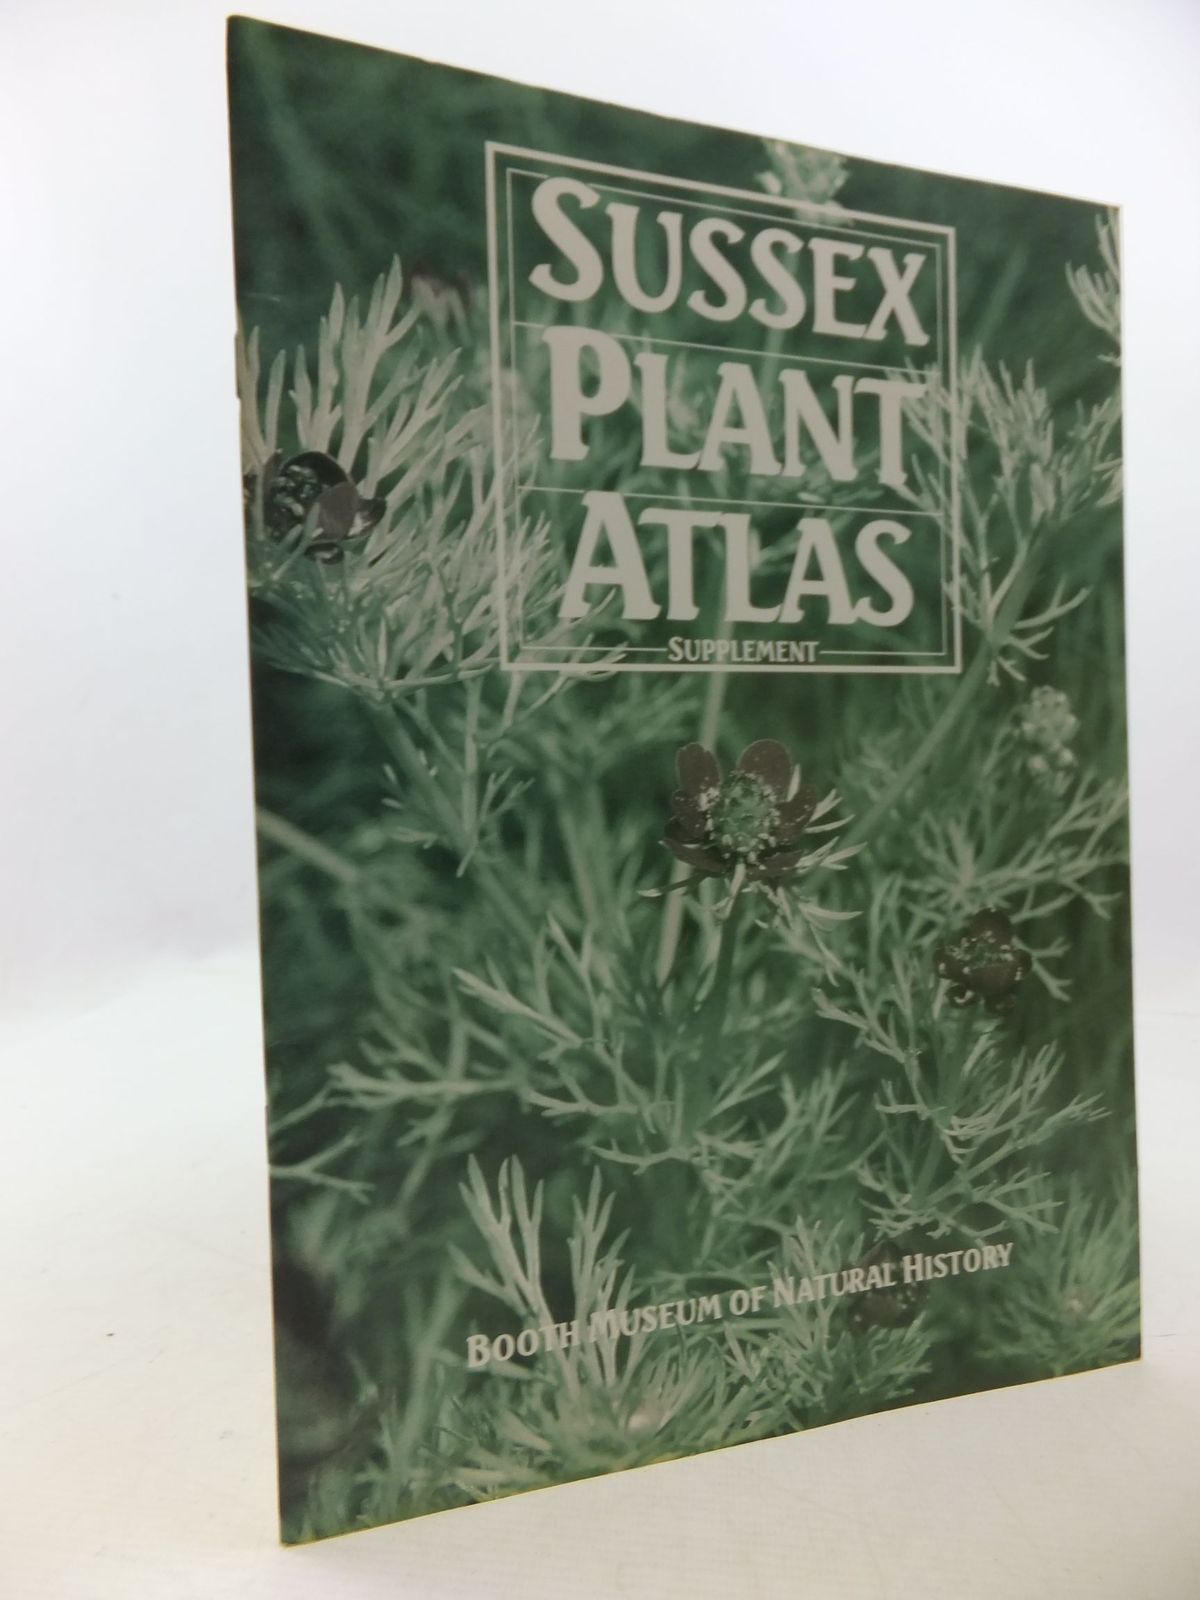 Photo of SUSSEX PLANT ATLAS SELECTED SUPPLEMENT written by Briggs, Mary published by Booth Museum Of Natural History (STOCK CODE: 2112502)  for sale by Stella & Rose's Books